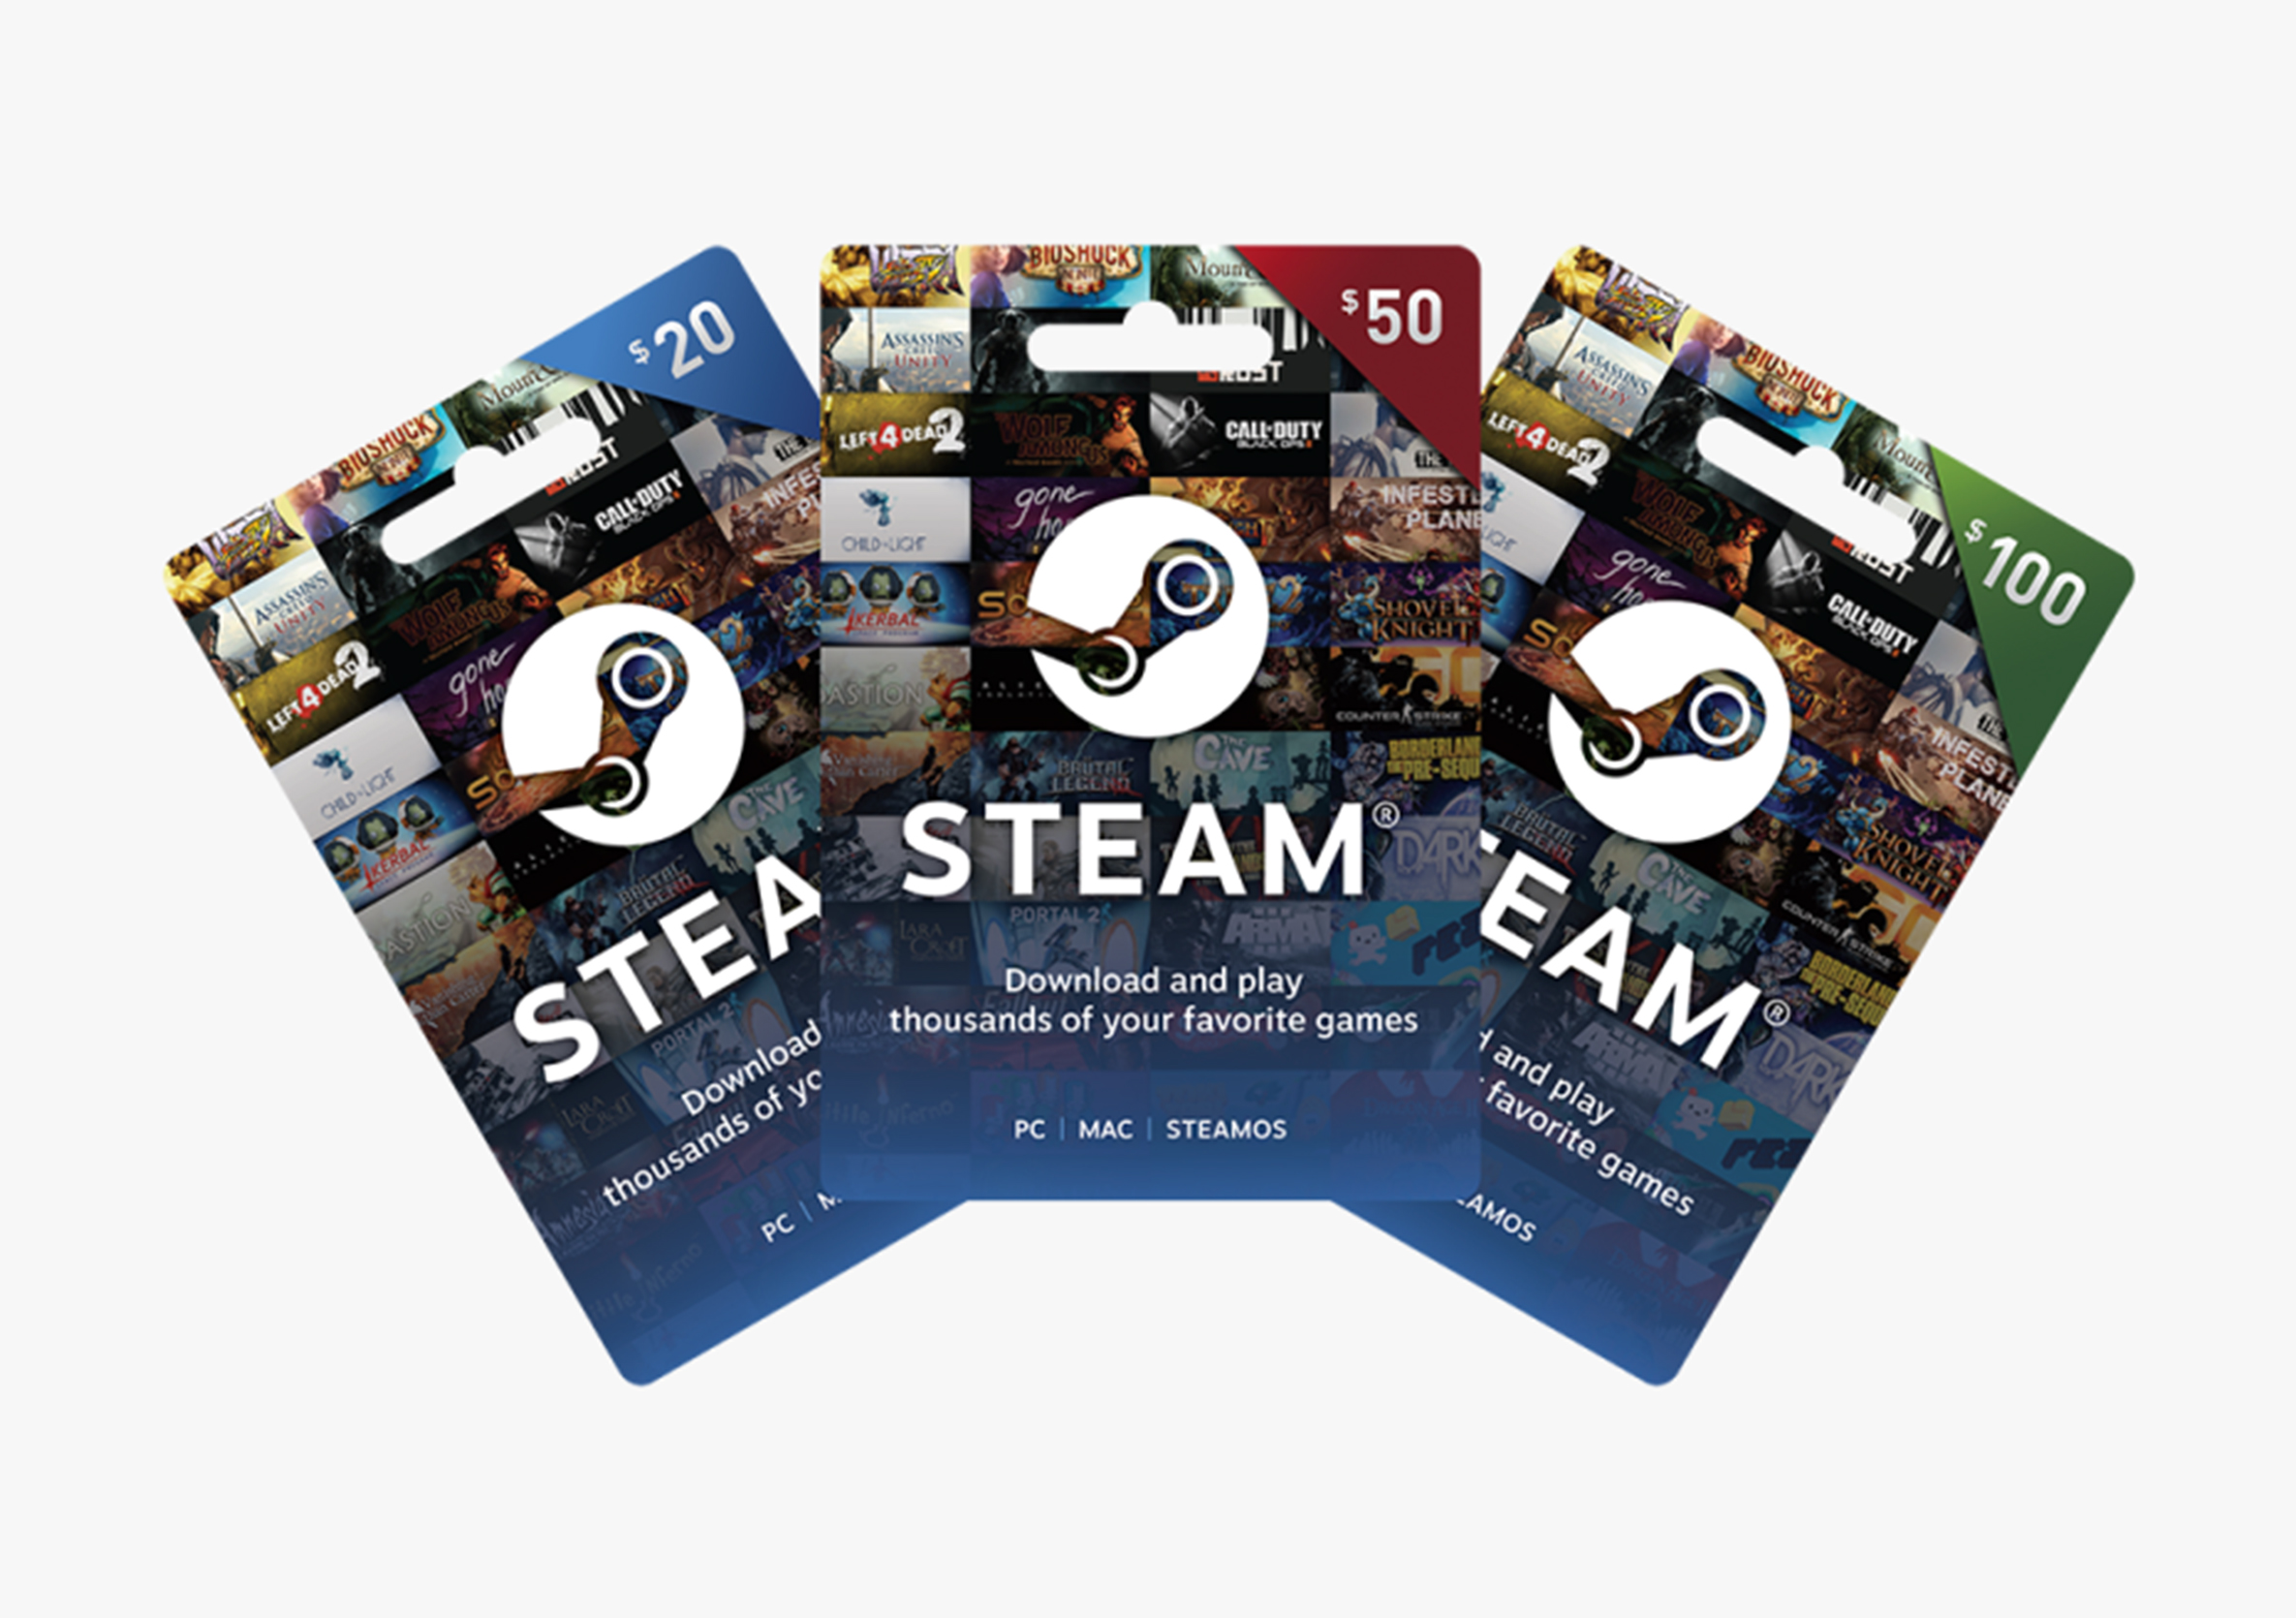 Steam Giftcard No extra charges official)  Pay under